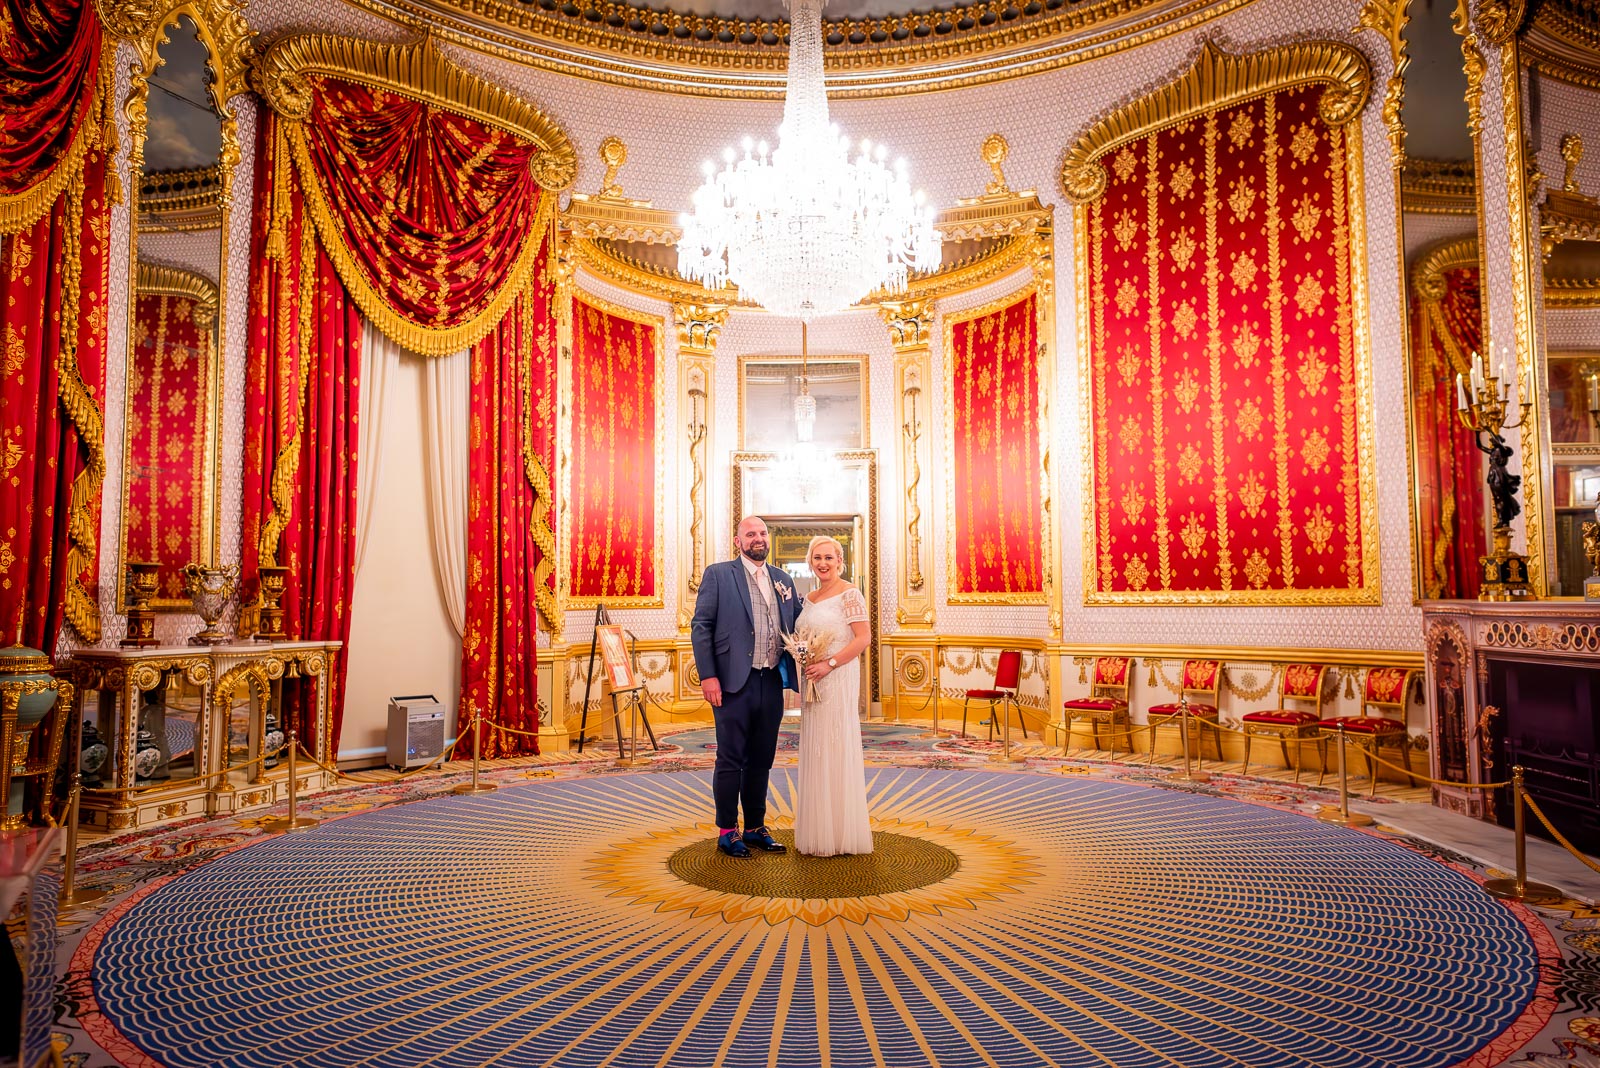 Georgina and Andy smile in the beautifully decorated Saloon in Brighton Royal Pavilion after their wedding.